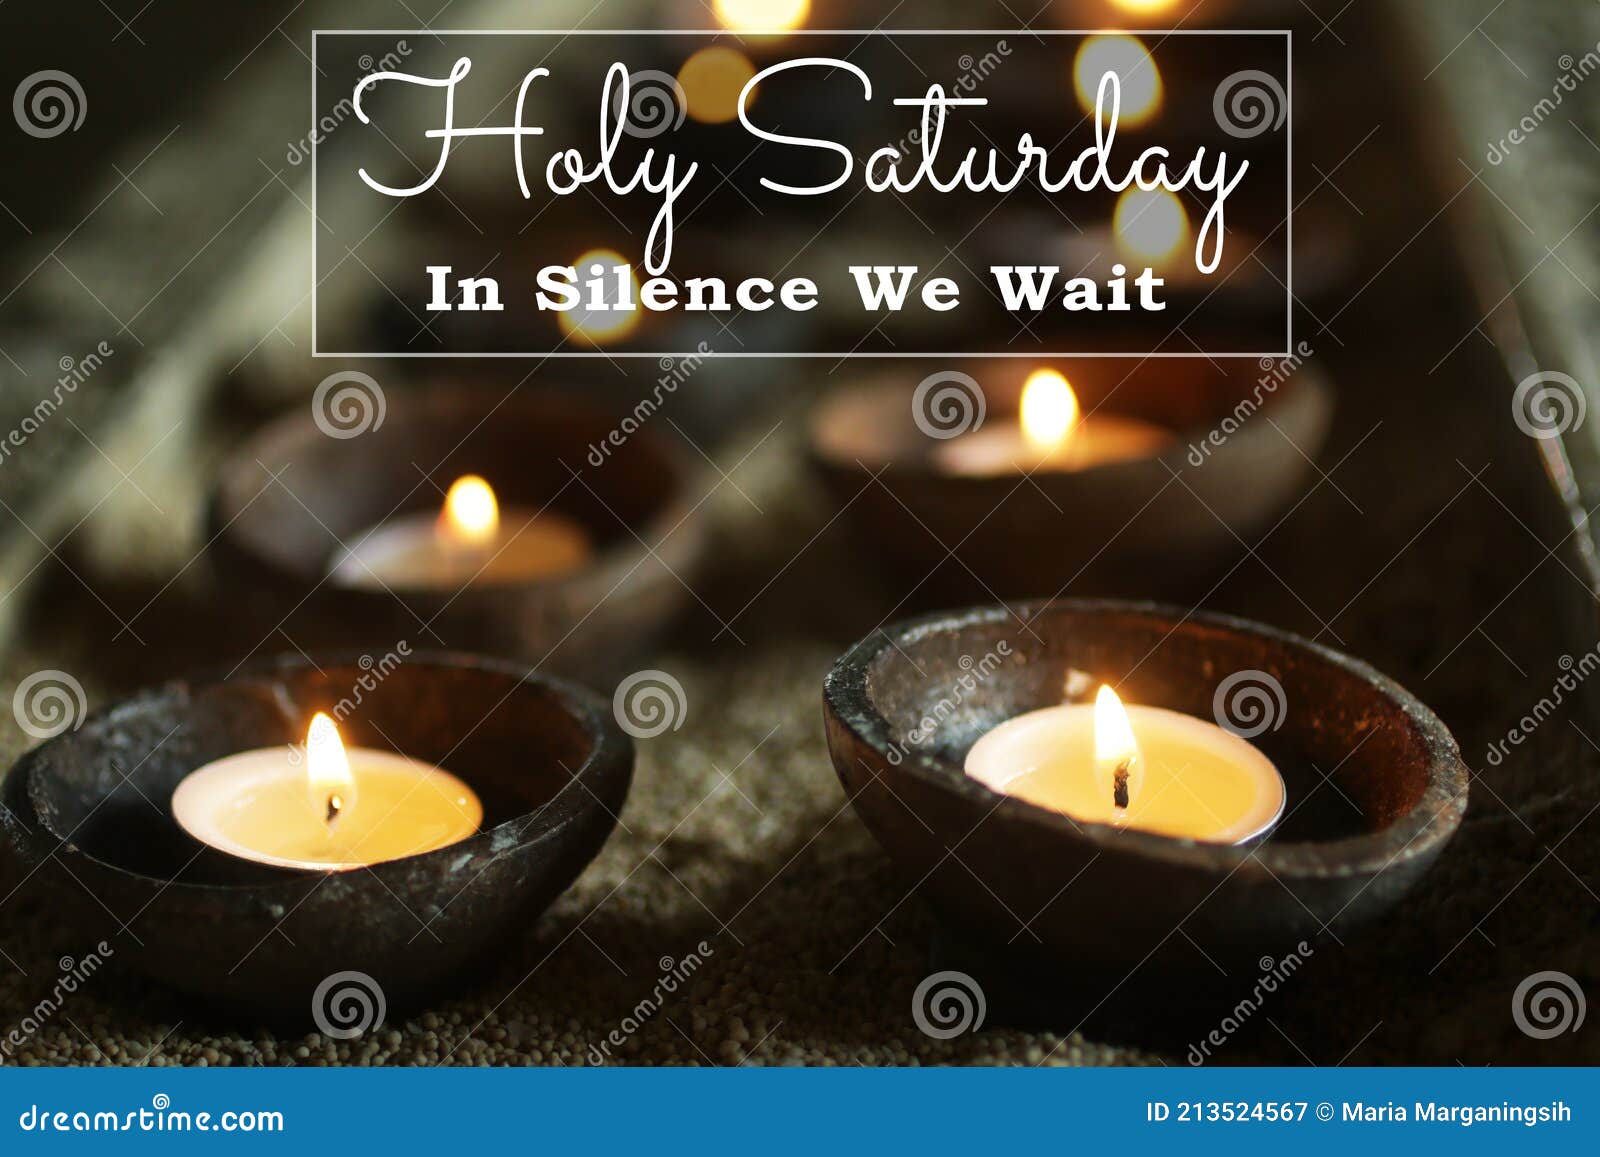 Holly Saturday. in Silence we Wait. Happy Holy Saturday Concept ...